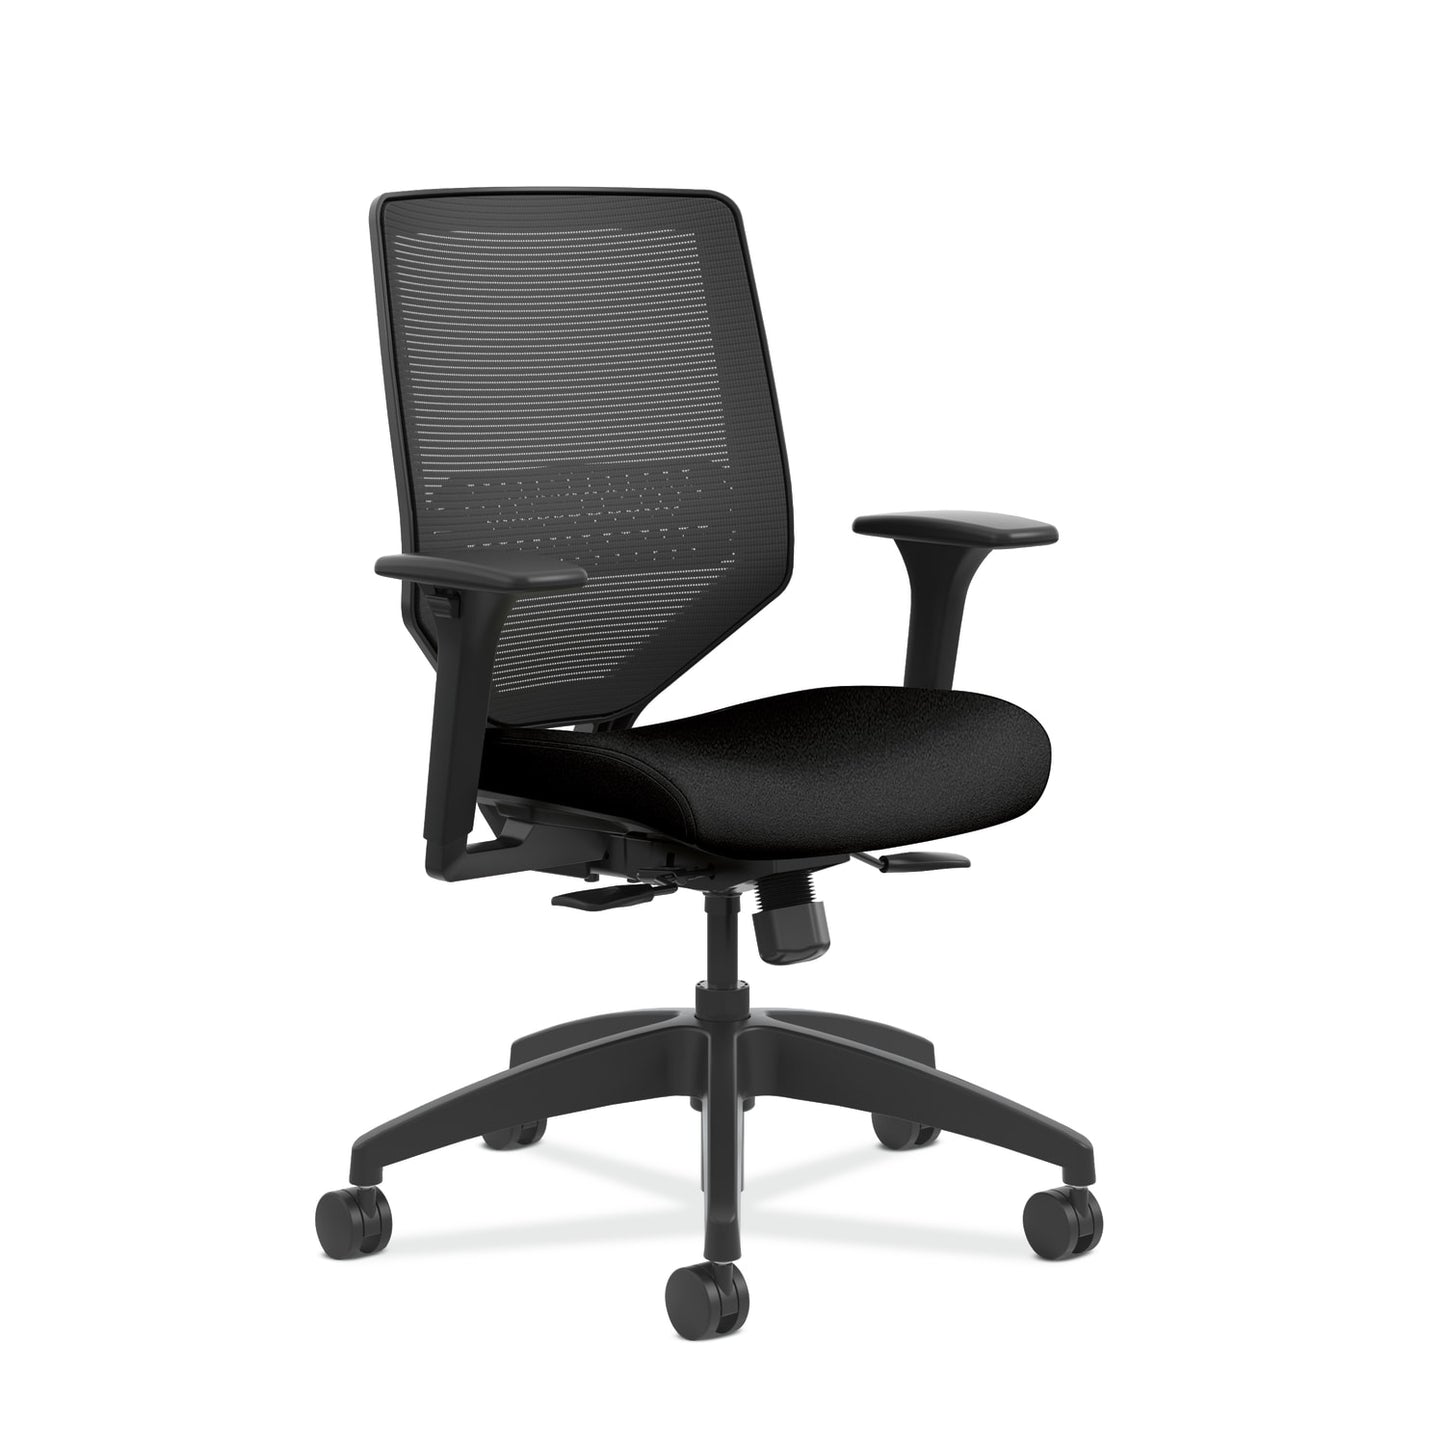 HON Solve Mid-Back Office Chair | Black 4-way stretch Mesh Back | Adjustable Lumbar Support | Adjustable Arms | Black Frame | Black Seat Fabric